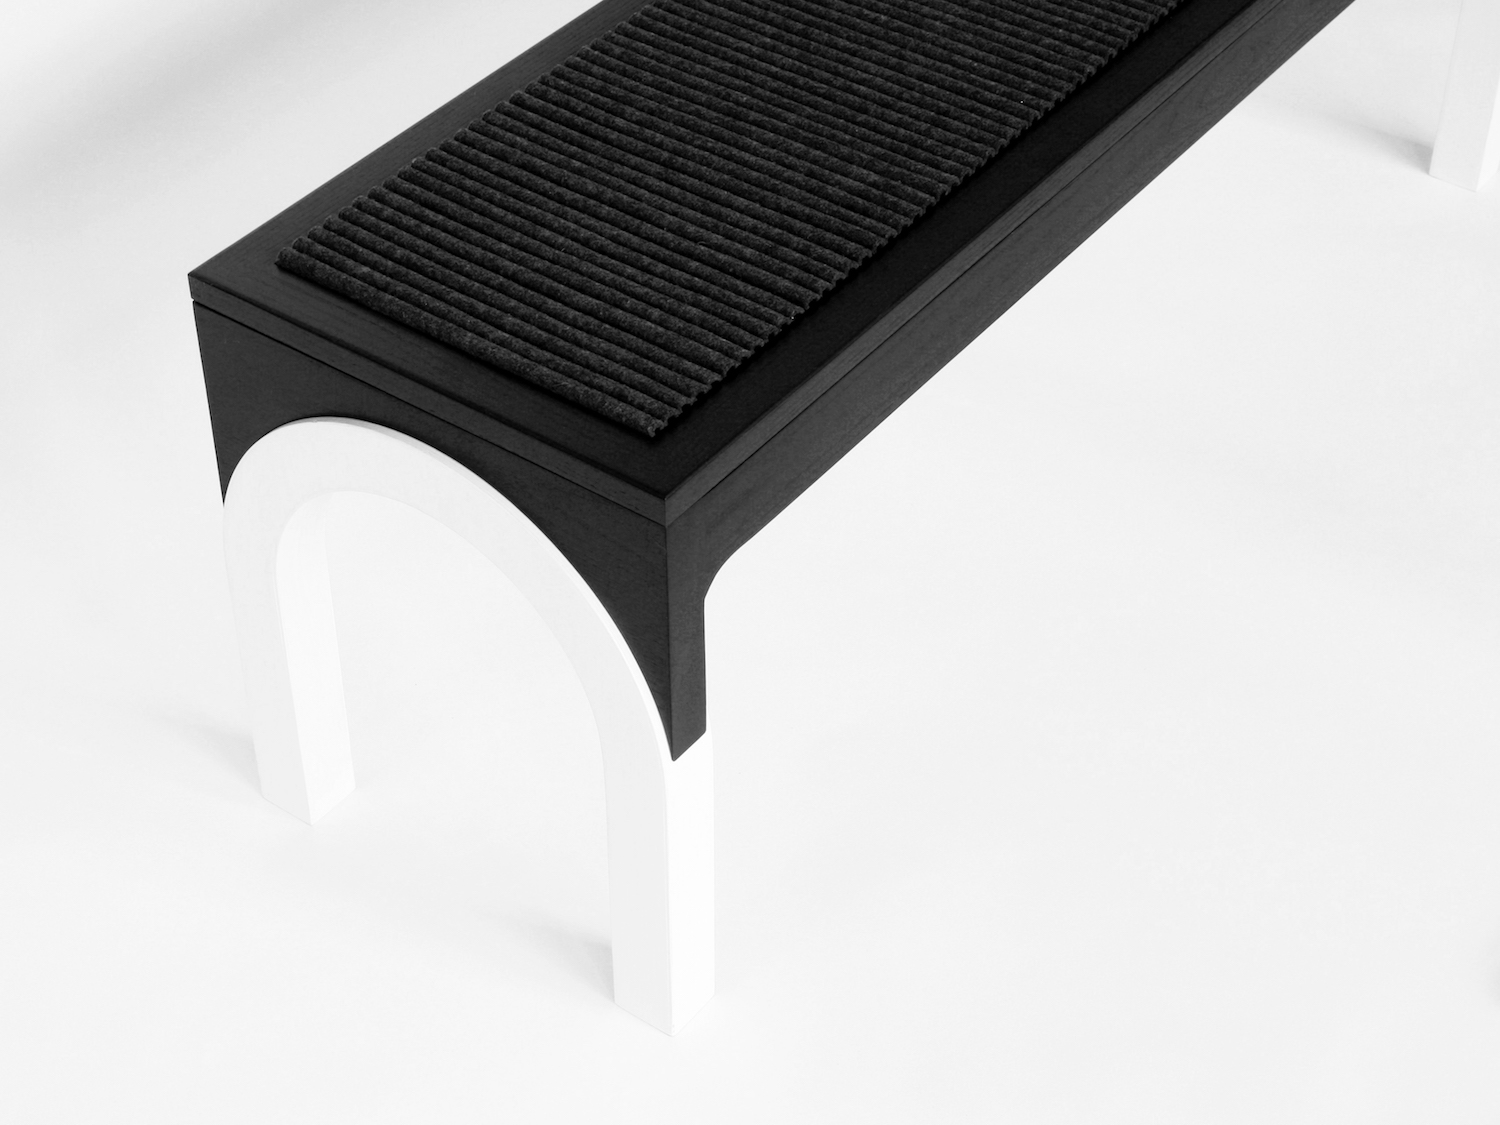 Arch Bench by Bower